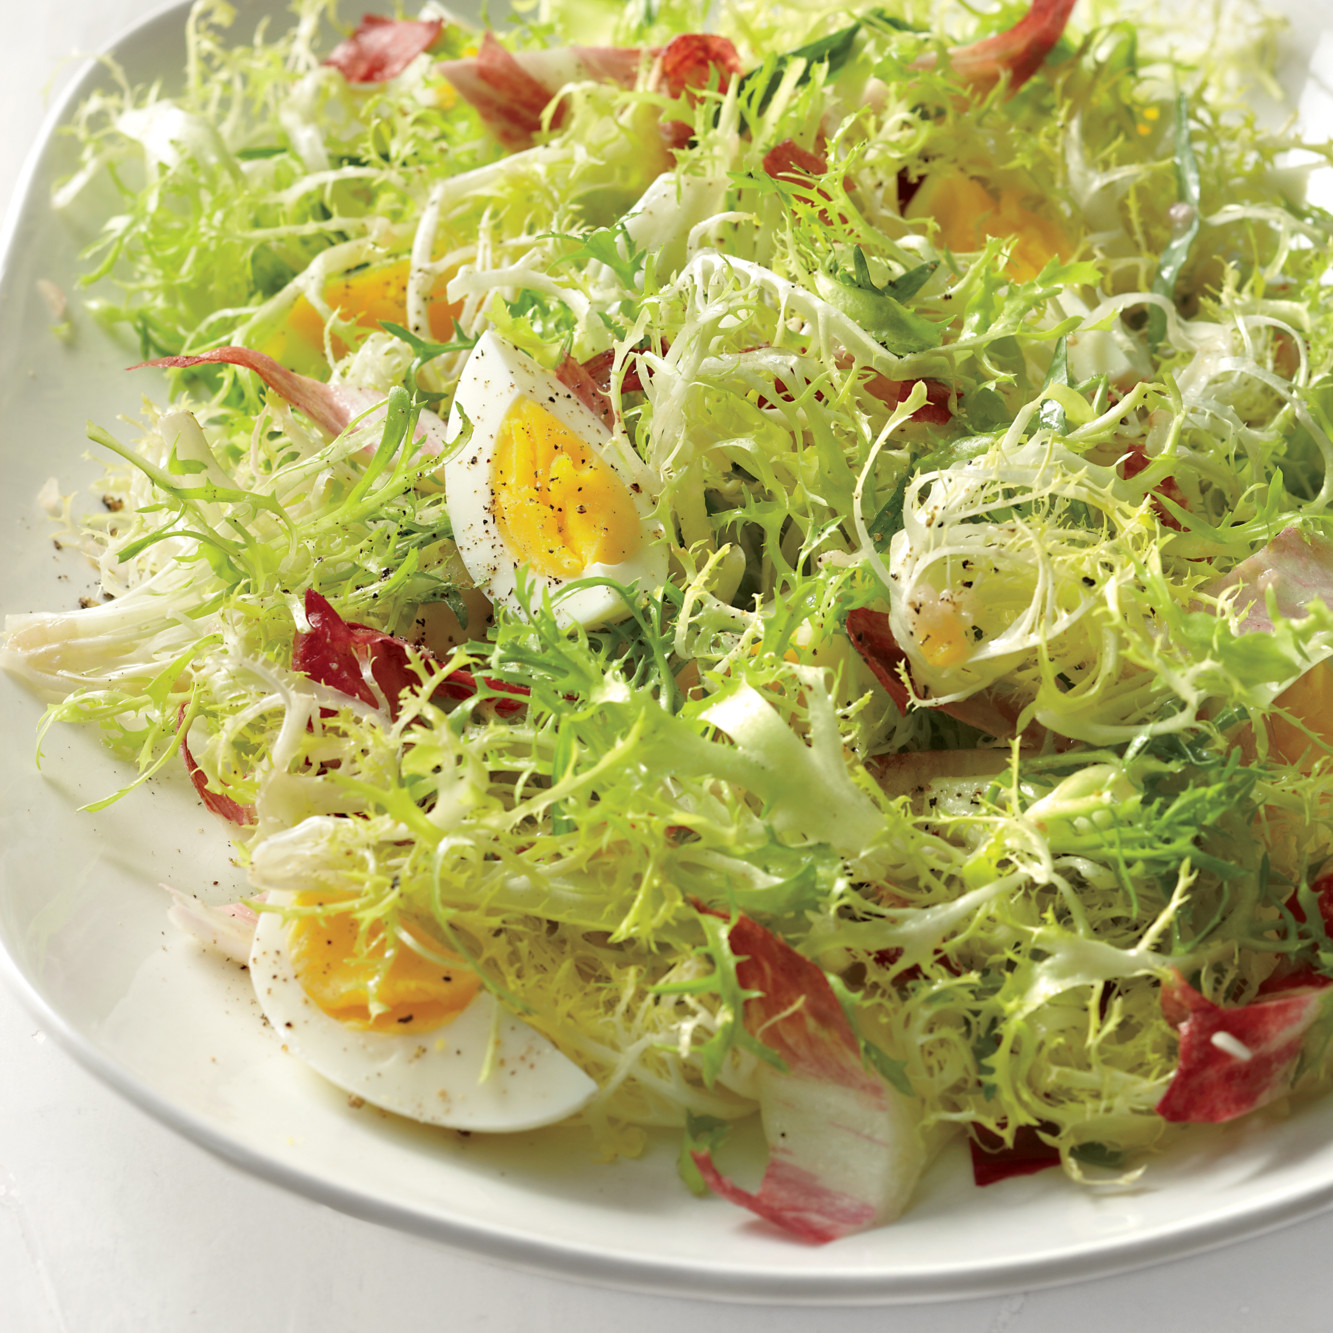 Frisee Salad with Hard-cooked Eggs